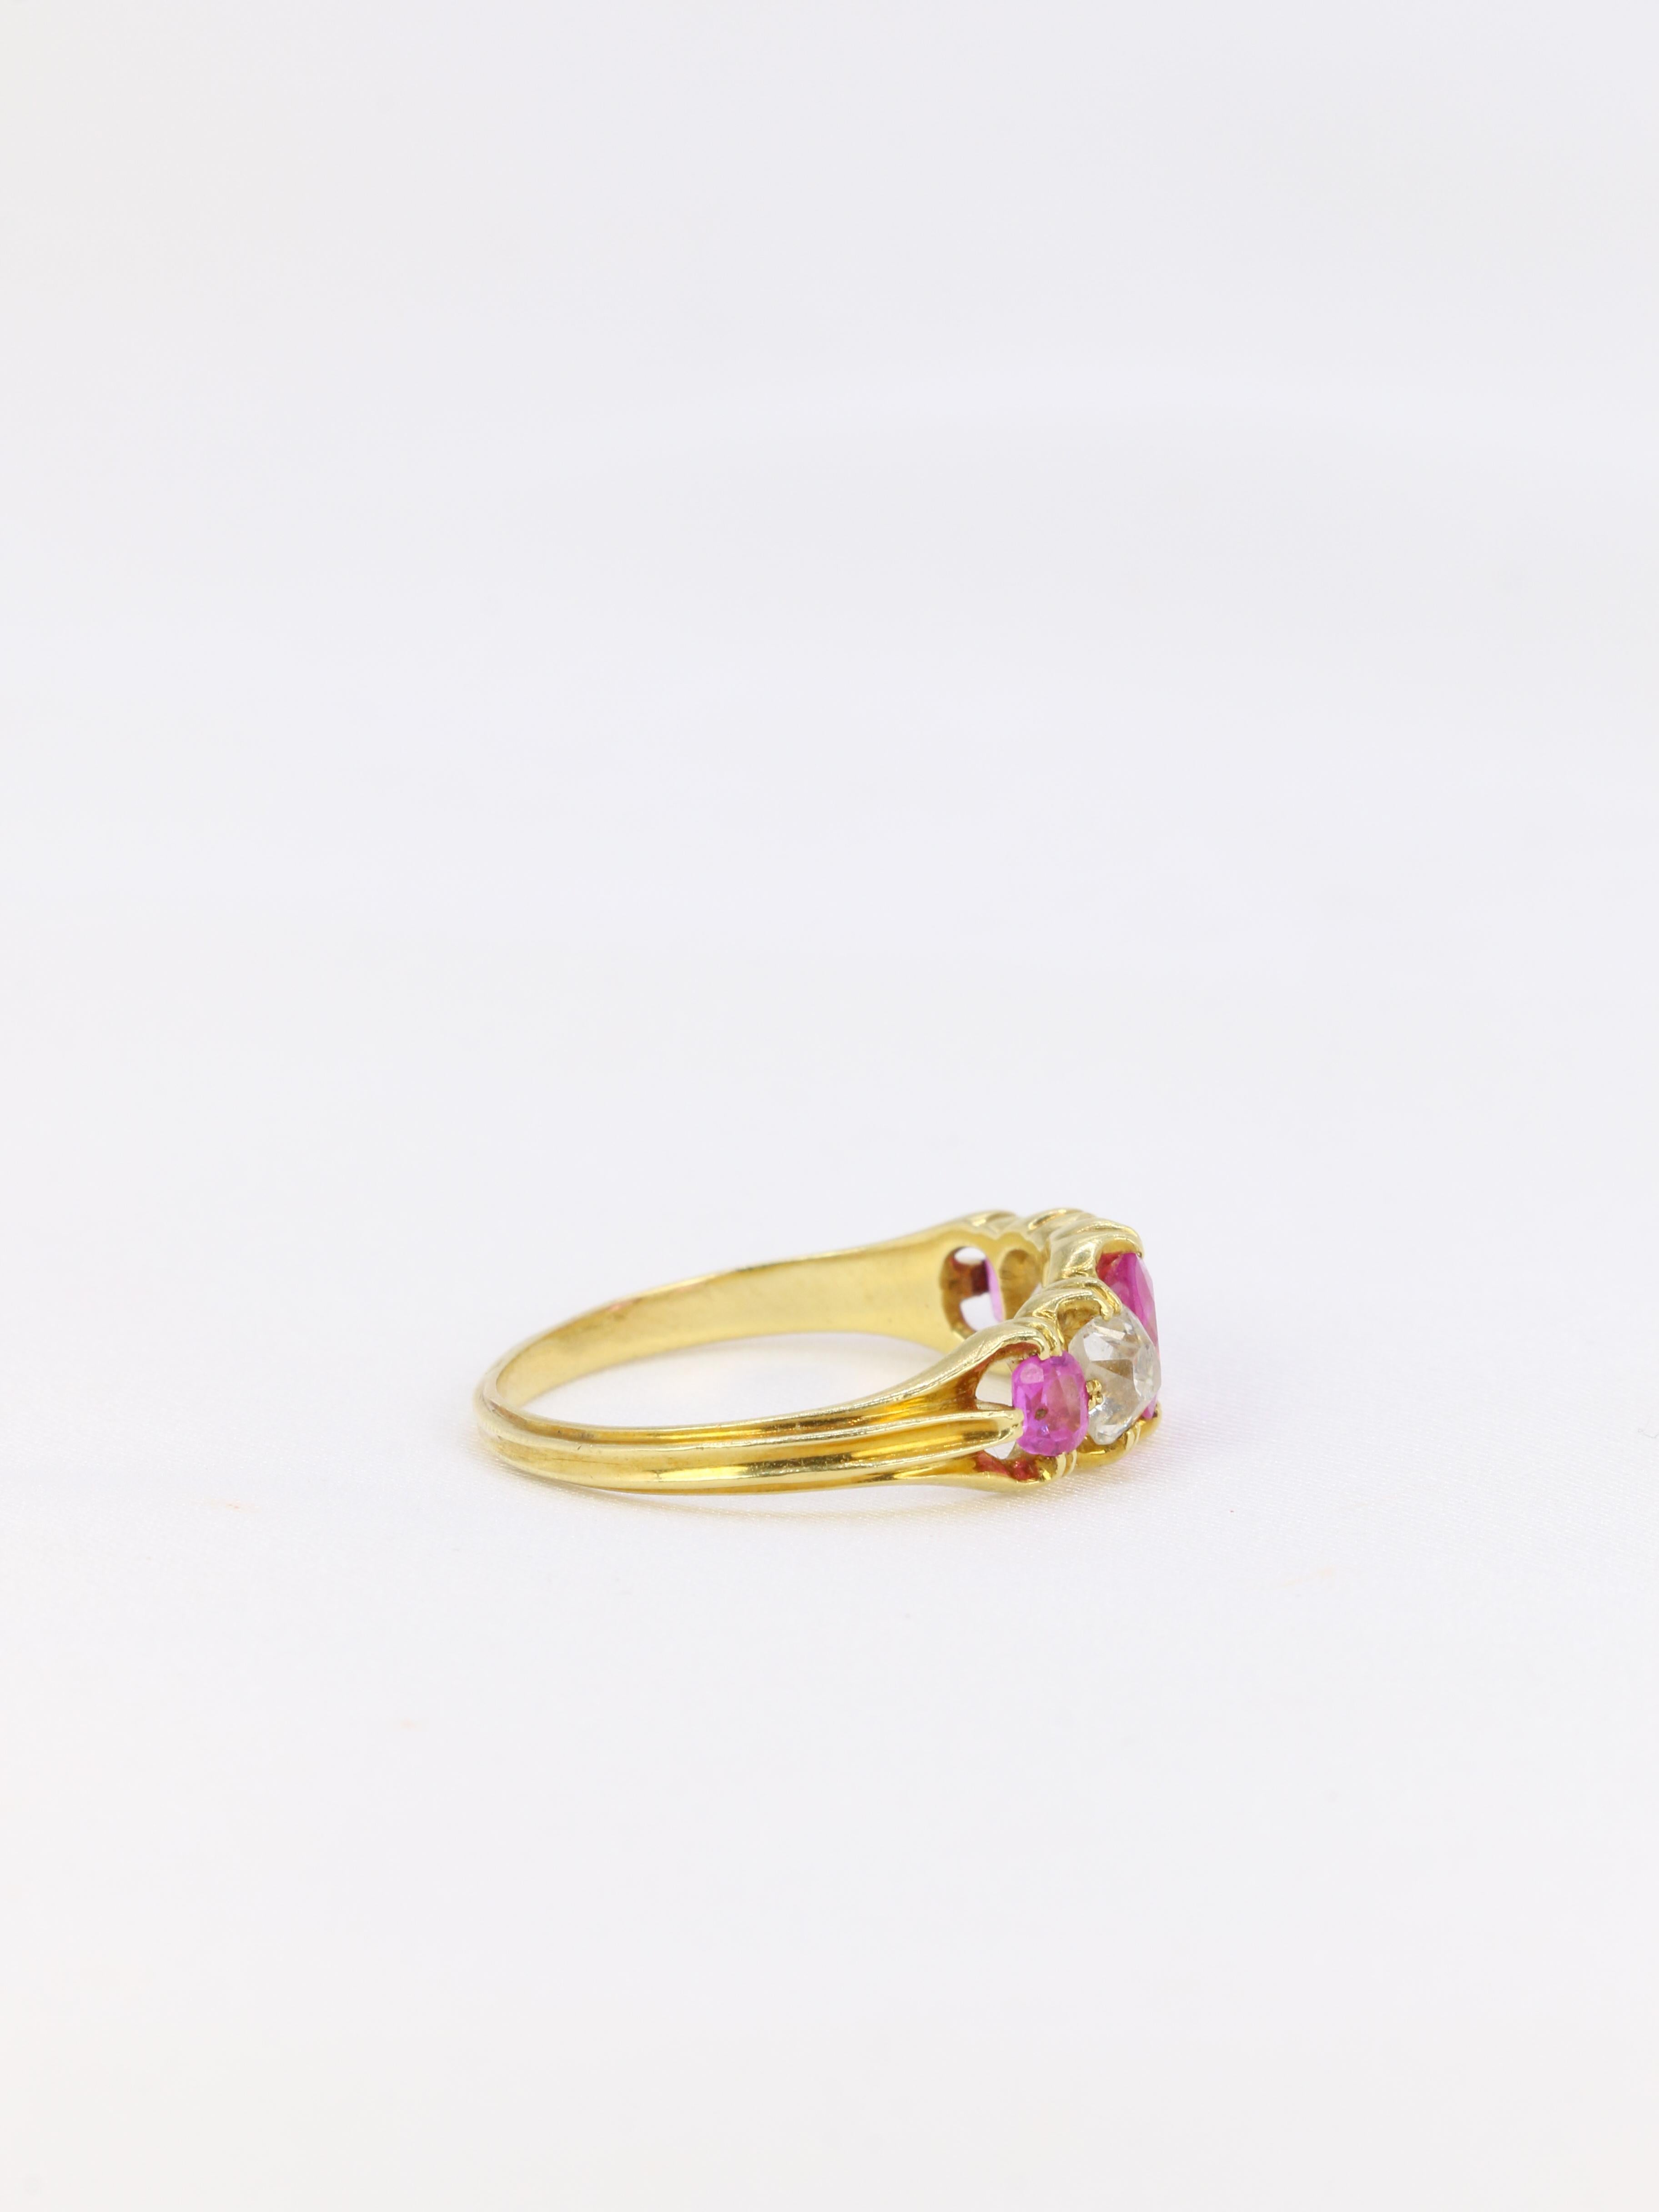 Victorian Yellow gold, pink sapphires and old mine cut diamonds garter ring For Sale